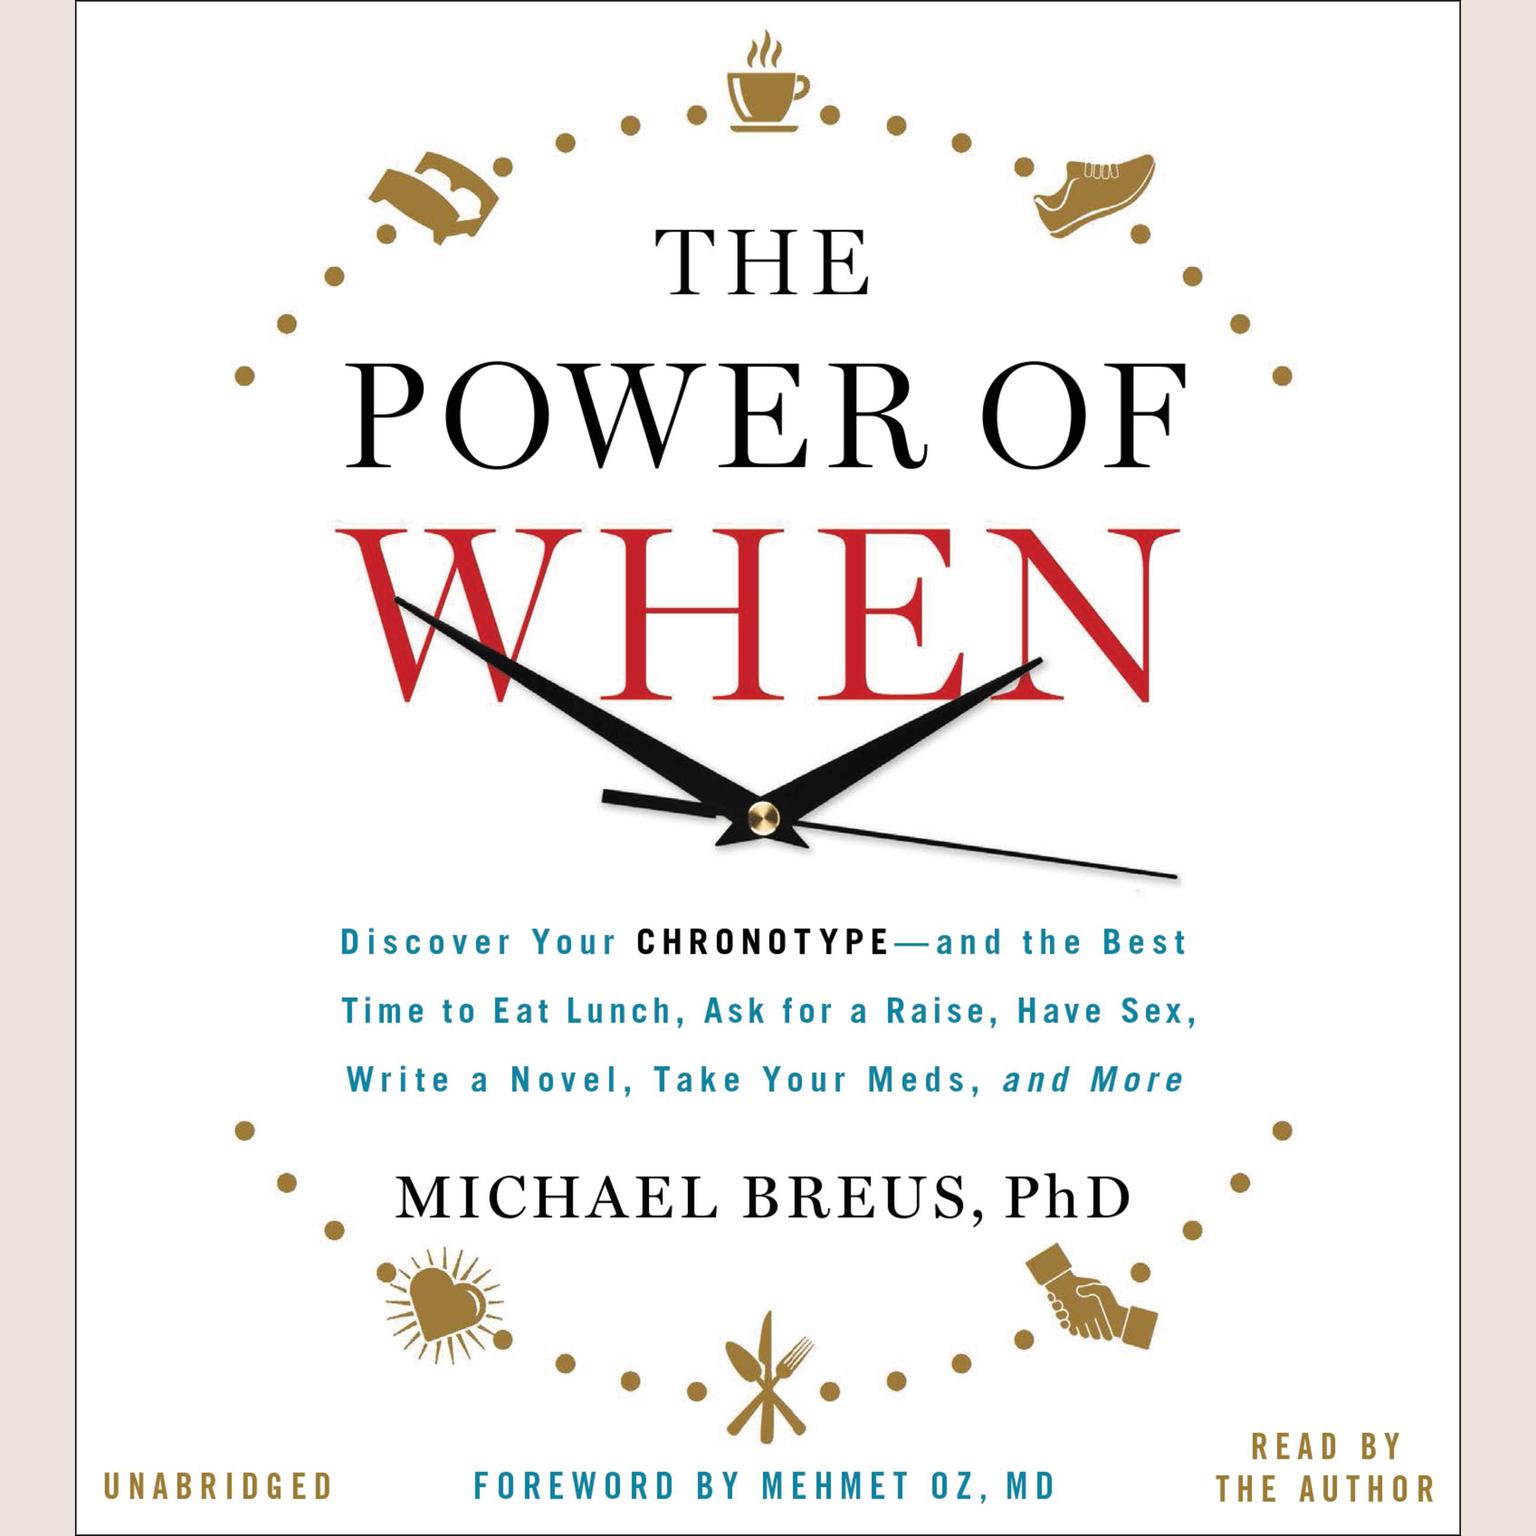 The Power of When: Discover Your Chronotype--and the Best Time to Eat Lunch, Ask for a Raise, Have Sex, Write a Novel, Take Your Meds, and More Audiobook, by Michael Breus